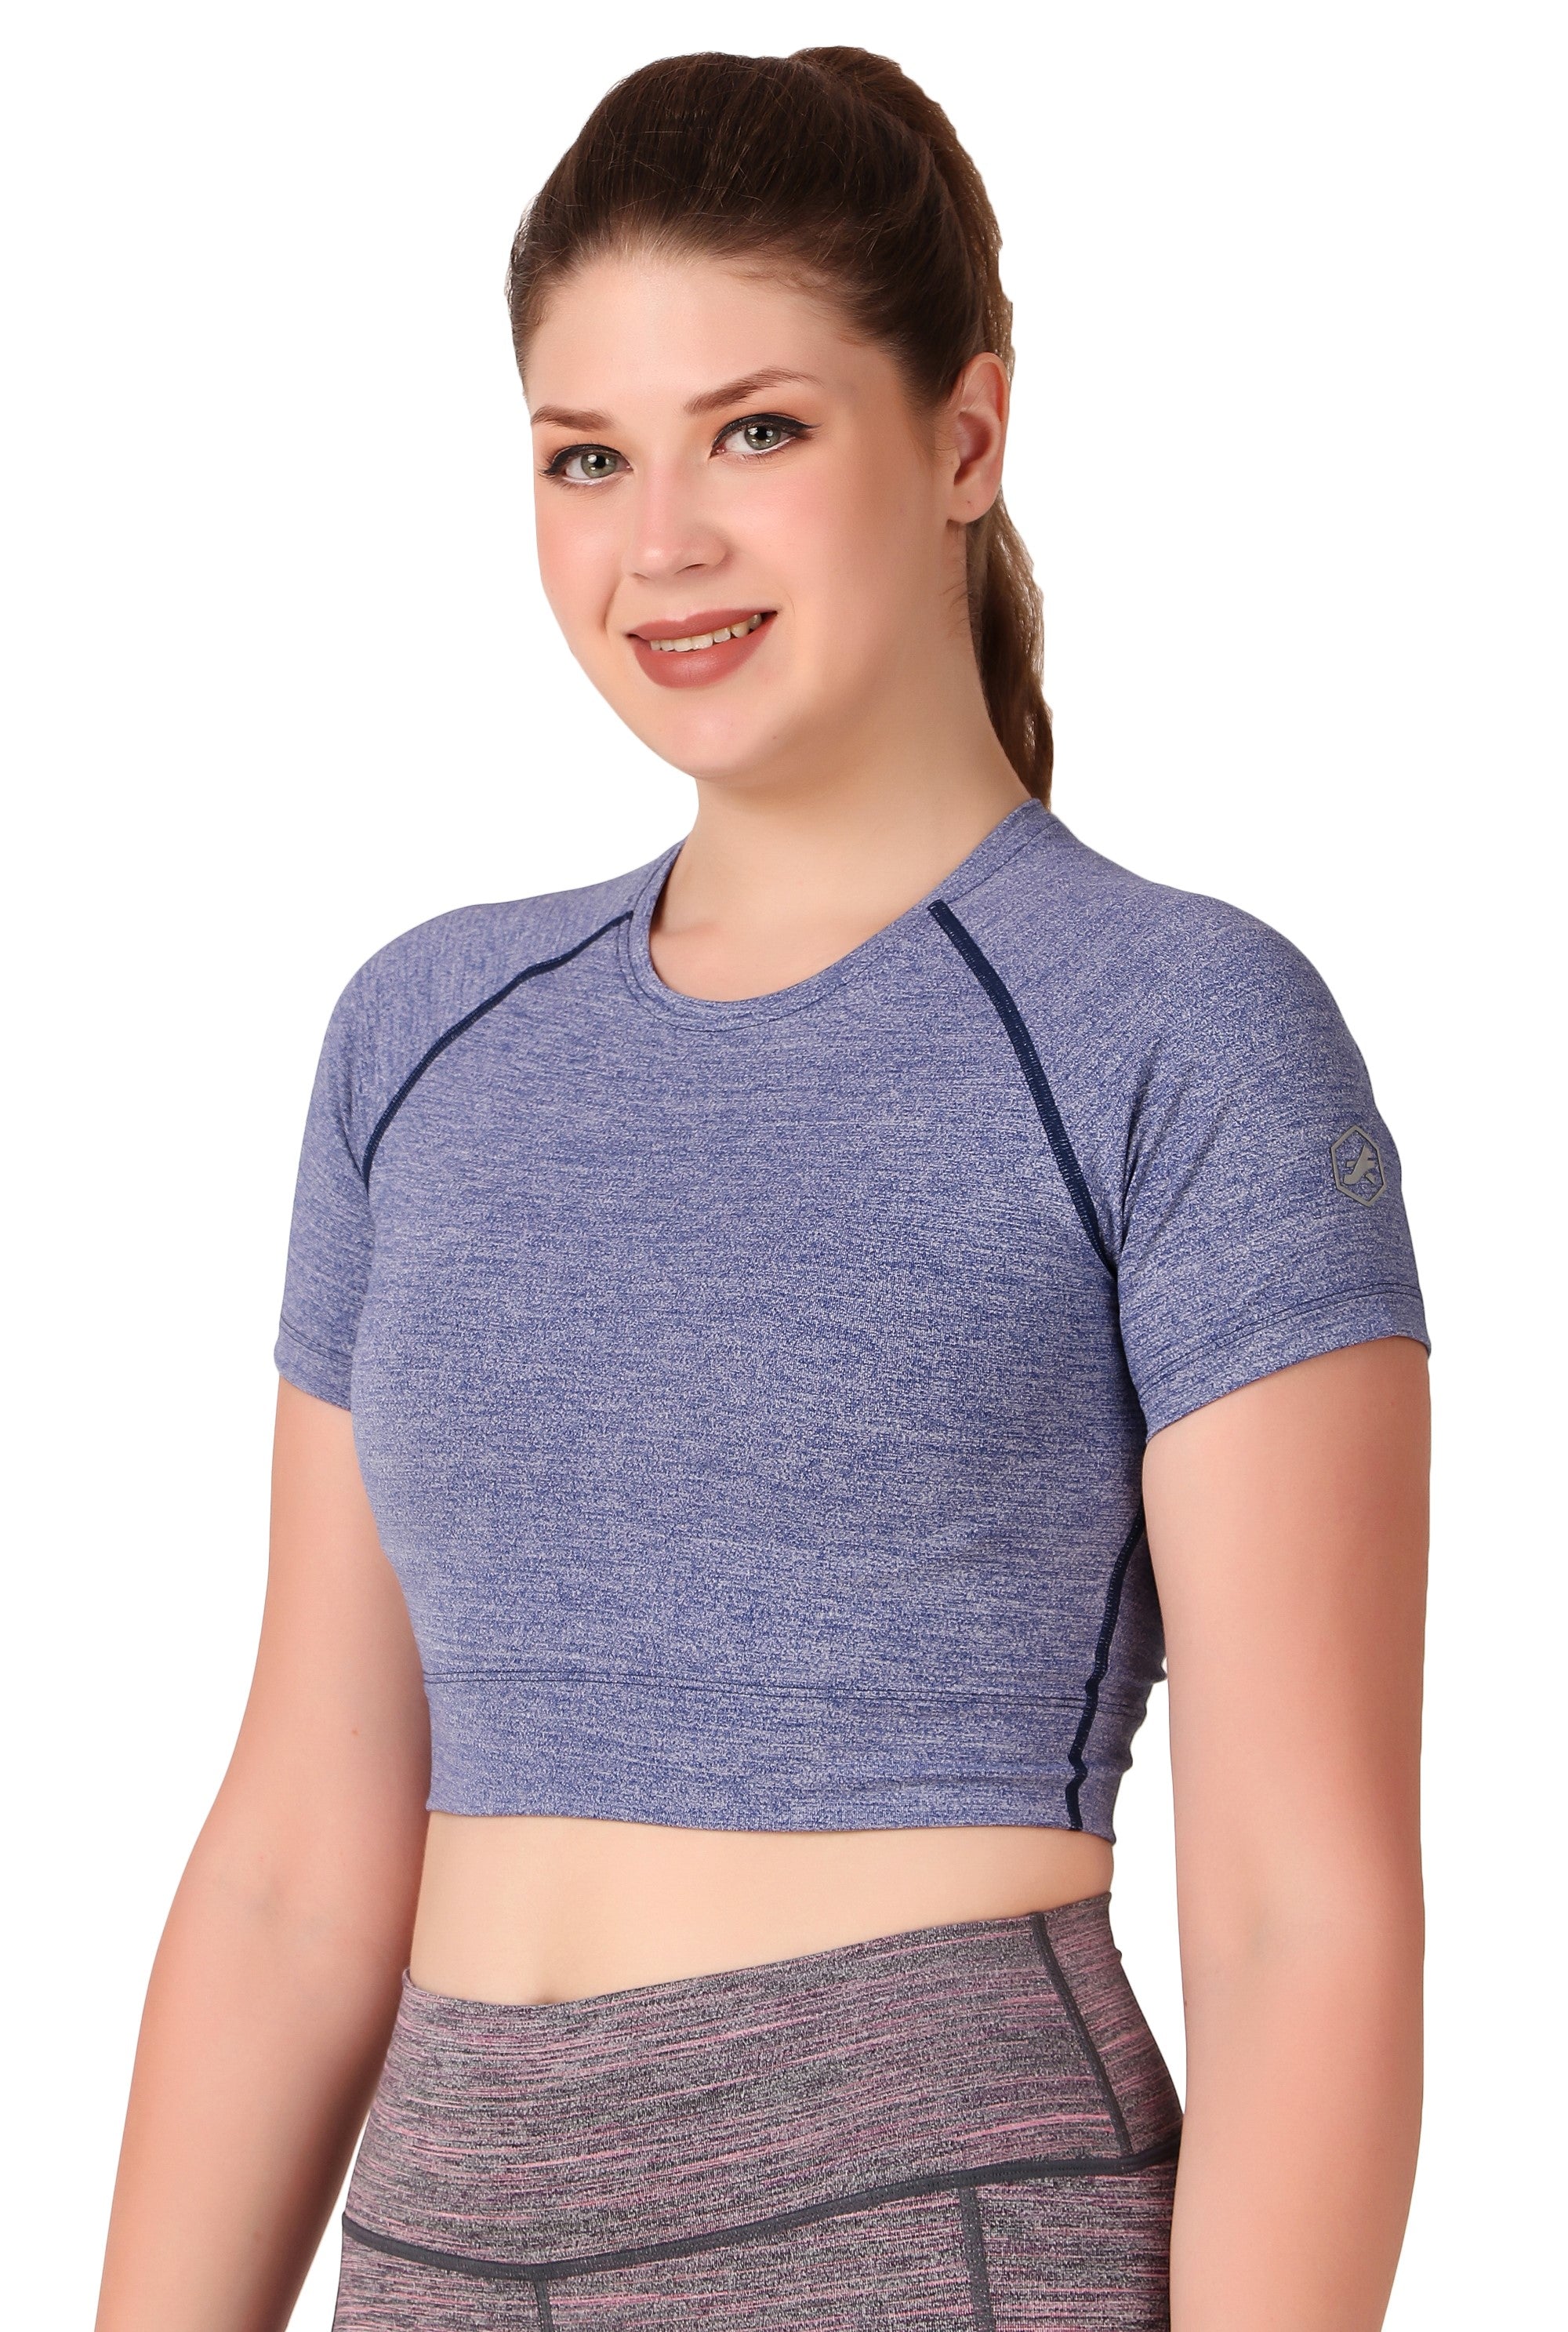 Compression Crop Top For Women (Purple Heather)